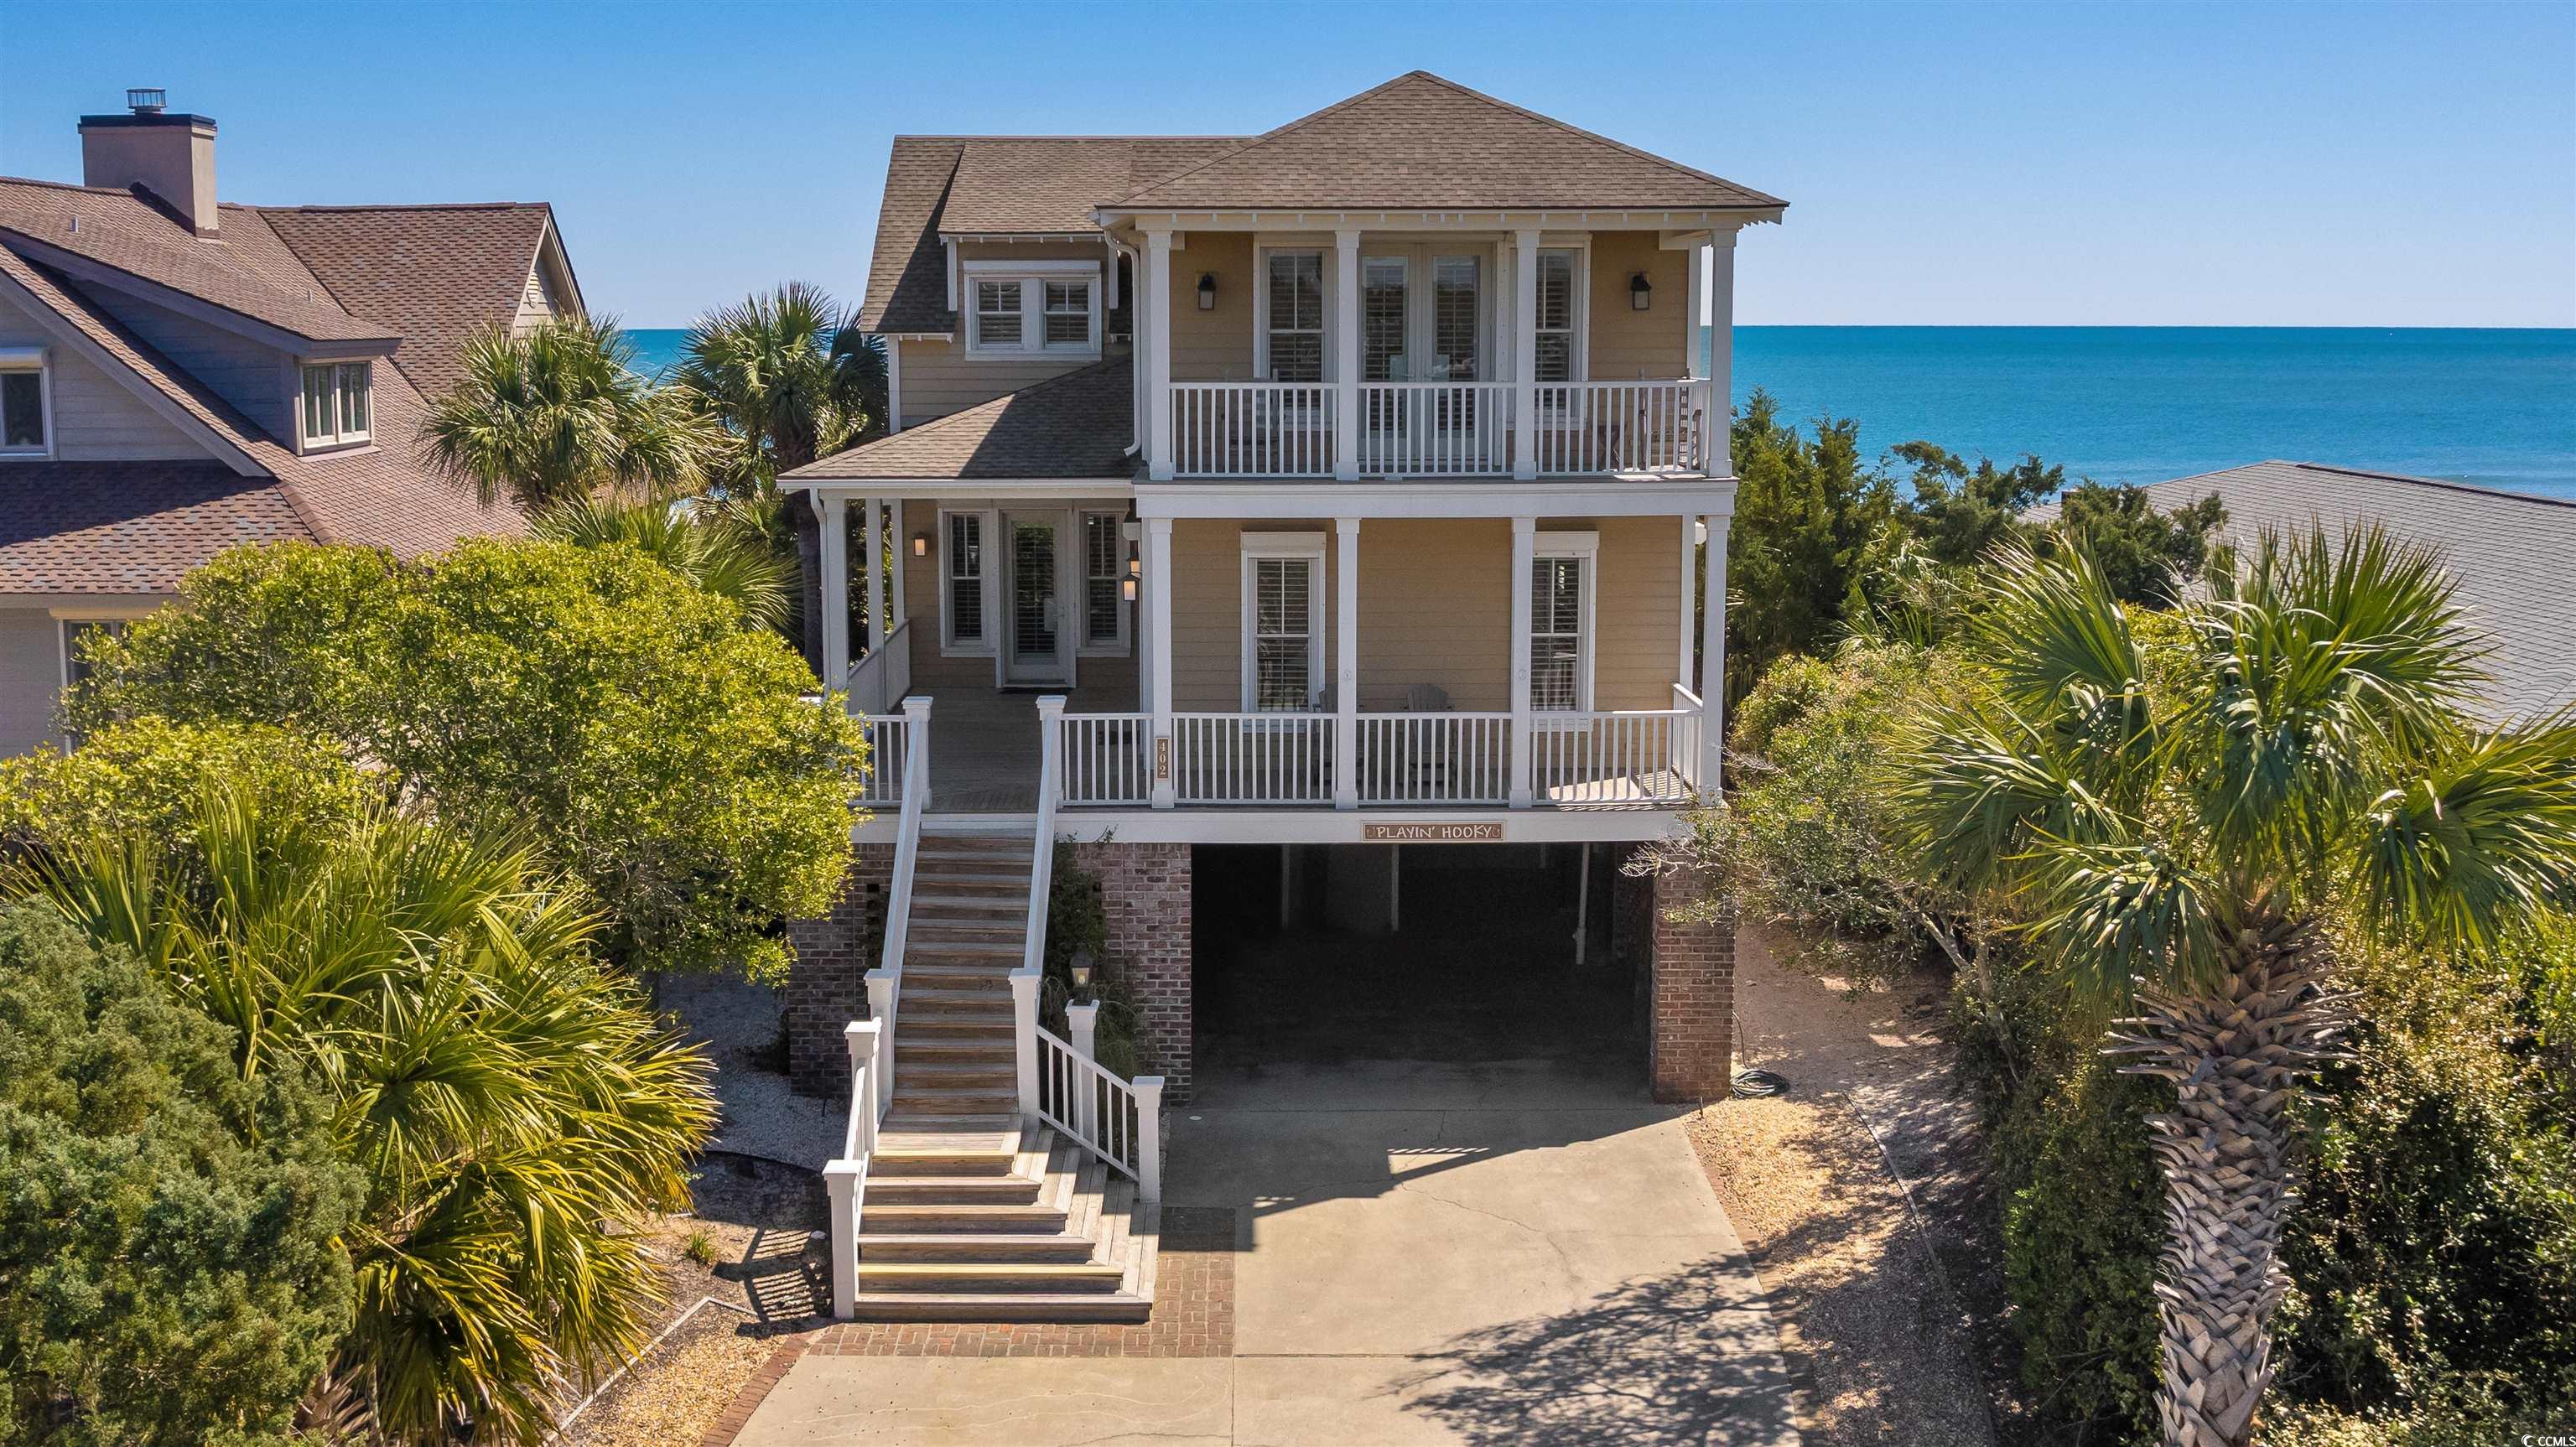 imagine waking up to the sounds of the ocean just outside your door. or enjoying a cool beverage watching the evening sunset over the pawleys island creek. this is the beauty of 402 myrtle avenue. this home sits on one of the highest points in pawleys island making it a safe haven from storms. porches on the front and rear of home provide ocean and creek views. inside you will find an open concept, large family living space for entertaining all your family and friends. newly installed stainless steel appliances compliment the chef in the family ready to serve anyone at the breakfast bar with 4 seats or long dining room table that seats 14. built-in buffet serving space makes family get-togethers easy to plan. living room has three cozy sofas with reclining end seats. tv is mounted over the new gas log fireplace. screened porch with picnic table just outside the family room and also an open air porch. boardwalk leading to the ocean has a shower for sandy feet, and a seating area with a flagpole for close views of the beach and ocean. a doggy boardwalk is off the open porch and leads down to a fenced-in area underneath the porch. also located on the first floor is a bedroom with views of the marsh and creek, full bathroom, laundry room with maytag washer and dryer and double utility sink, two 50 gallon hot water tanks, and a half bath. there is an elevator that opens on all three levels. stairs lead underneath the house. another set of stairs takes you upstairs to four more generously sized bedrooms. a loft area with sofa and table can be used for office space or extra sleeping space. one upstairs bedroom has french doors leading out to a porch overlooking the creek and marsh. two more bedrooms have built-in sleeping spaces in the dormer in addition to the beds already in the rooms. plenty of closet space for storage. the master bedroom overlooks the ocean and has its own private porch for enjoying the cool ocean breezes. the master bath has a walk-in closet and another closet. also in the master bath are a double vanity, linen cabinet, separate whirlpool tub, and stand alone shower. underneath the house on the ground level, are two enclosed showers, toilet and fish sink. three storage closets are also on the ground level as well as an extra refrigerator to store extra drinks and food. elevator access on the ground level is very helpful for getting not only your loved ones, but also your grocery haul upstairs. the boardwalk to the beach is wheelchair accessible from the ground level. take a walk across the street to the newly constructed, private dock and enjoy the relaxing views of pawleys creek. you might even see friends riding by in a jon boat fishing or just cruising along. this home is located in the historic district of pawleys island and is perfectly situated along the annual 4th of july parade route. pawleys island is home to many award winning golf courses, fine and casual dining, shops and boutiques, art galleries and river access. myrtle beach is 30 miles to the north. charleston is 60 miles to the south.  take advantage of this once-in-a-lifetime opportunity to be able to purchase a spacious, strong, beautiful oceanfront home along the south carolina coast. call us today to come visit this home and begin enjoying your life in pawleys island, sc.